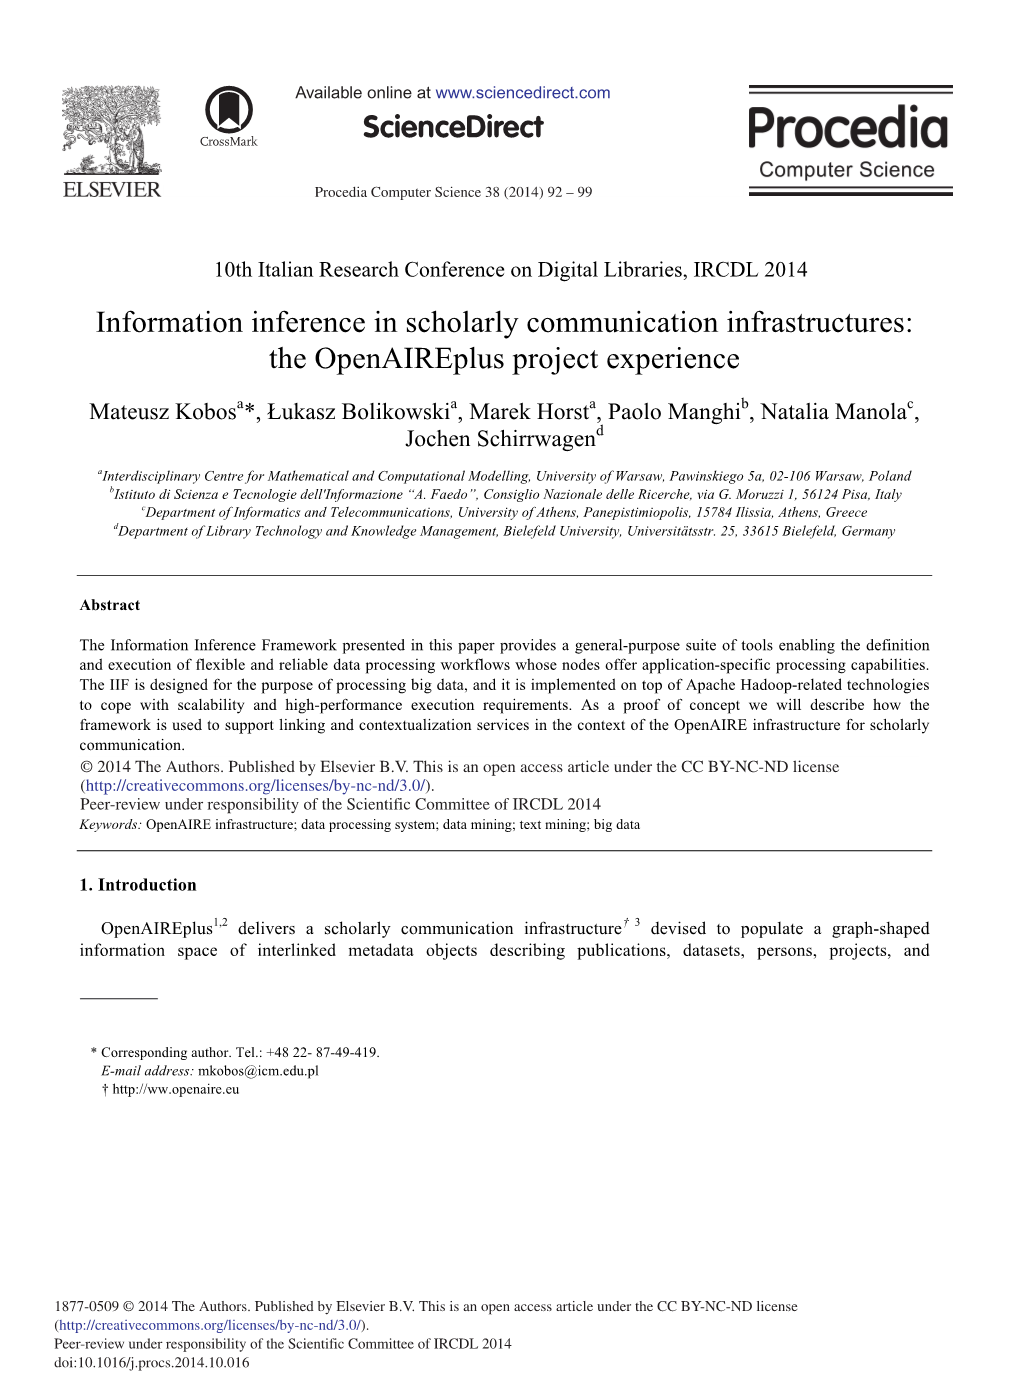 Information Inference in Scholarly Communication Infrastructures: the Openaireplus Project Experience